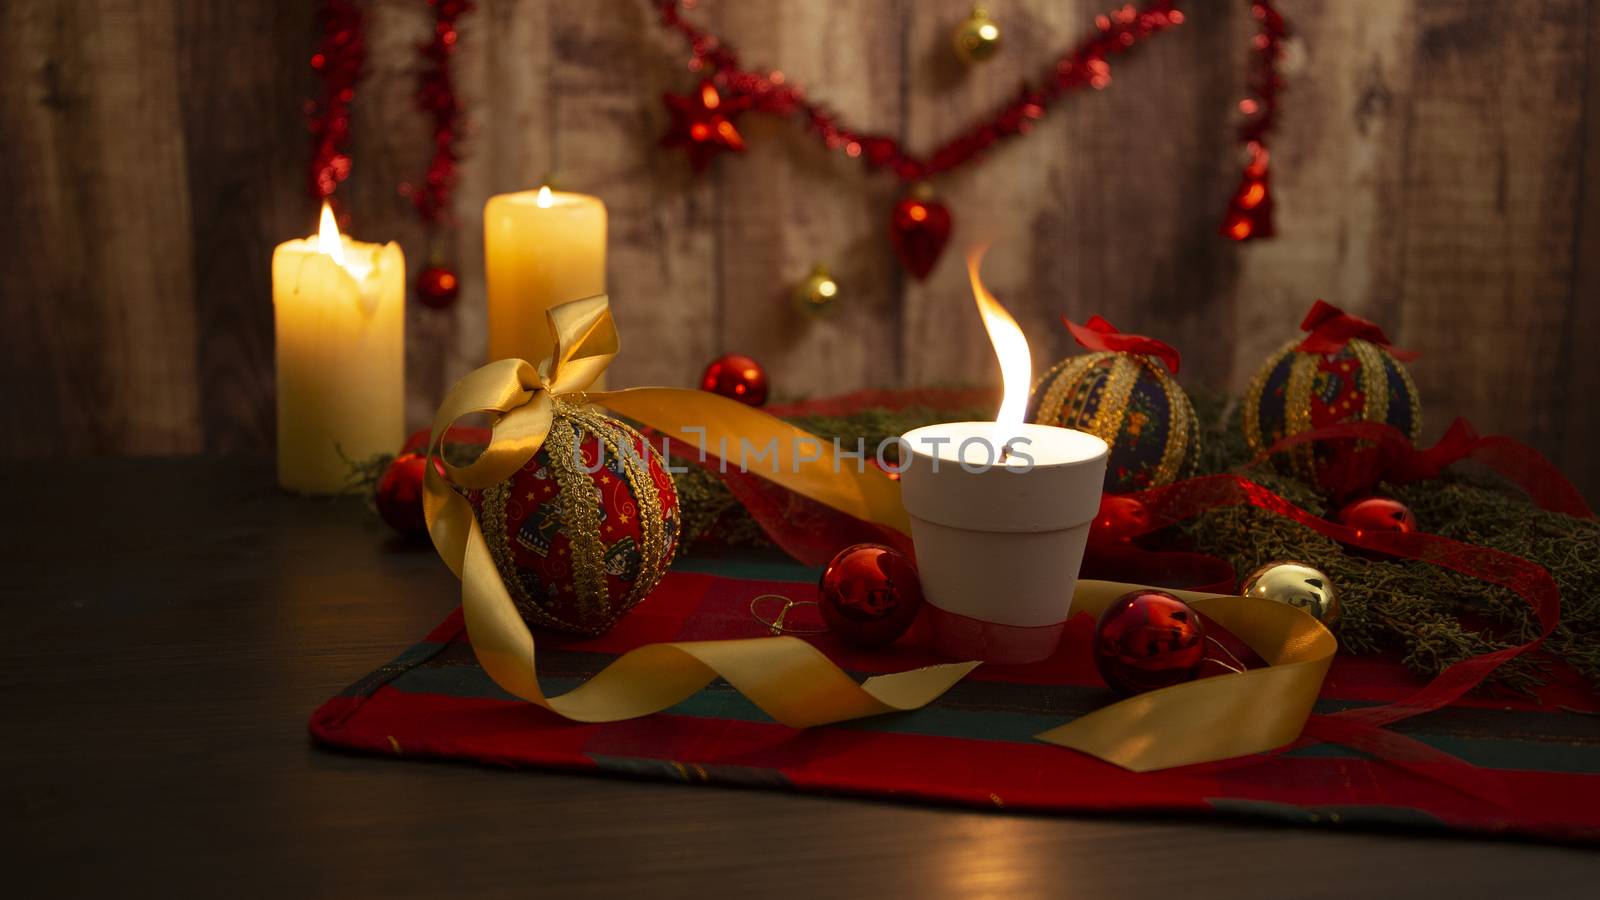 Lit candle with big flame on Christmas table cloth with around pine branches, decoupage baubles, with lit candles and hanging Christmas decoration on wooden background with bokeh effect